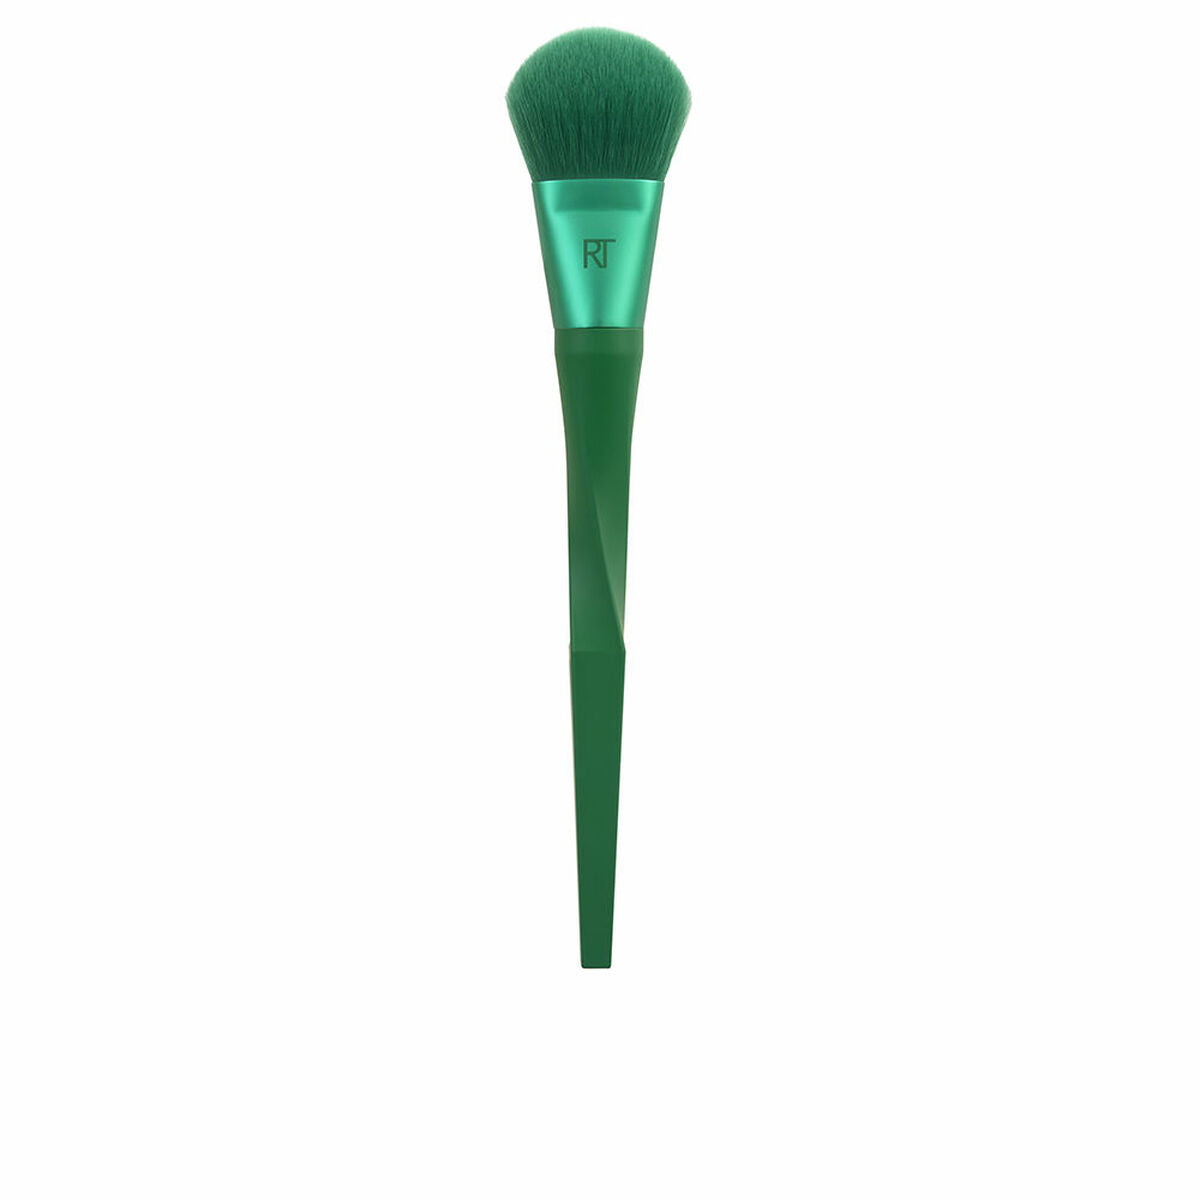 Make-up base brush Real Techniques Nectar Pop Green-0